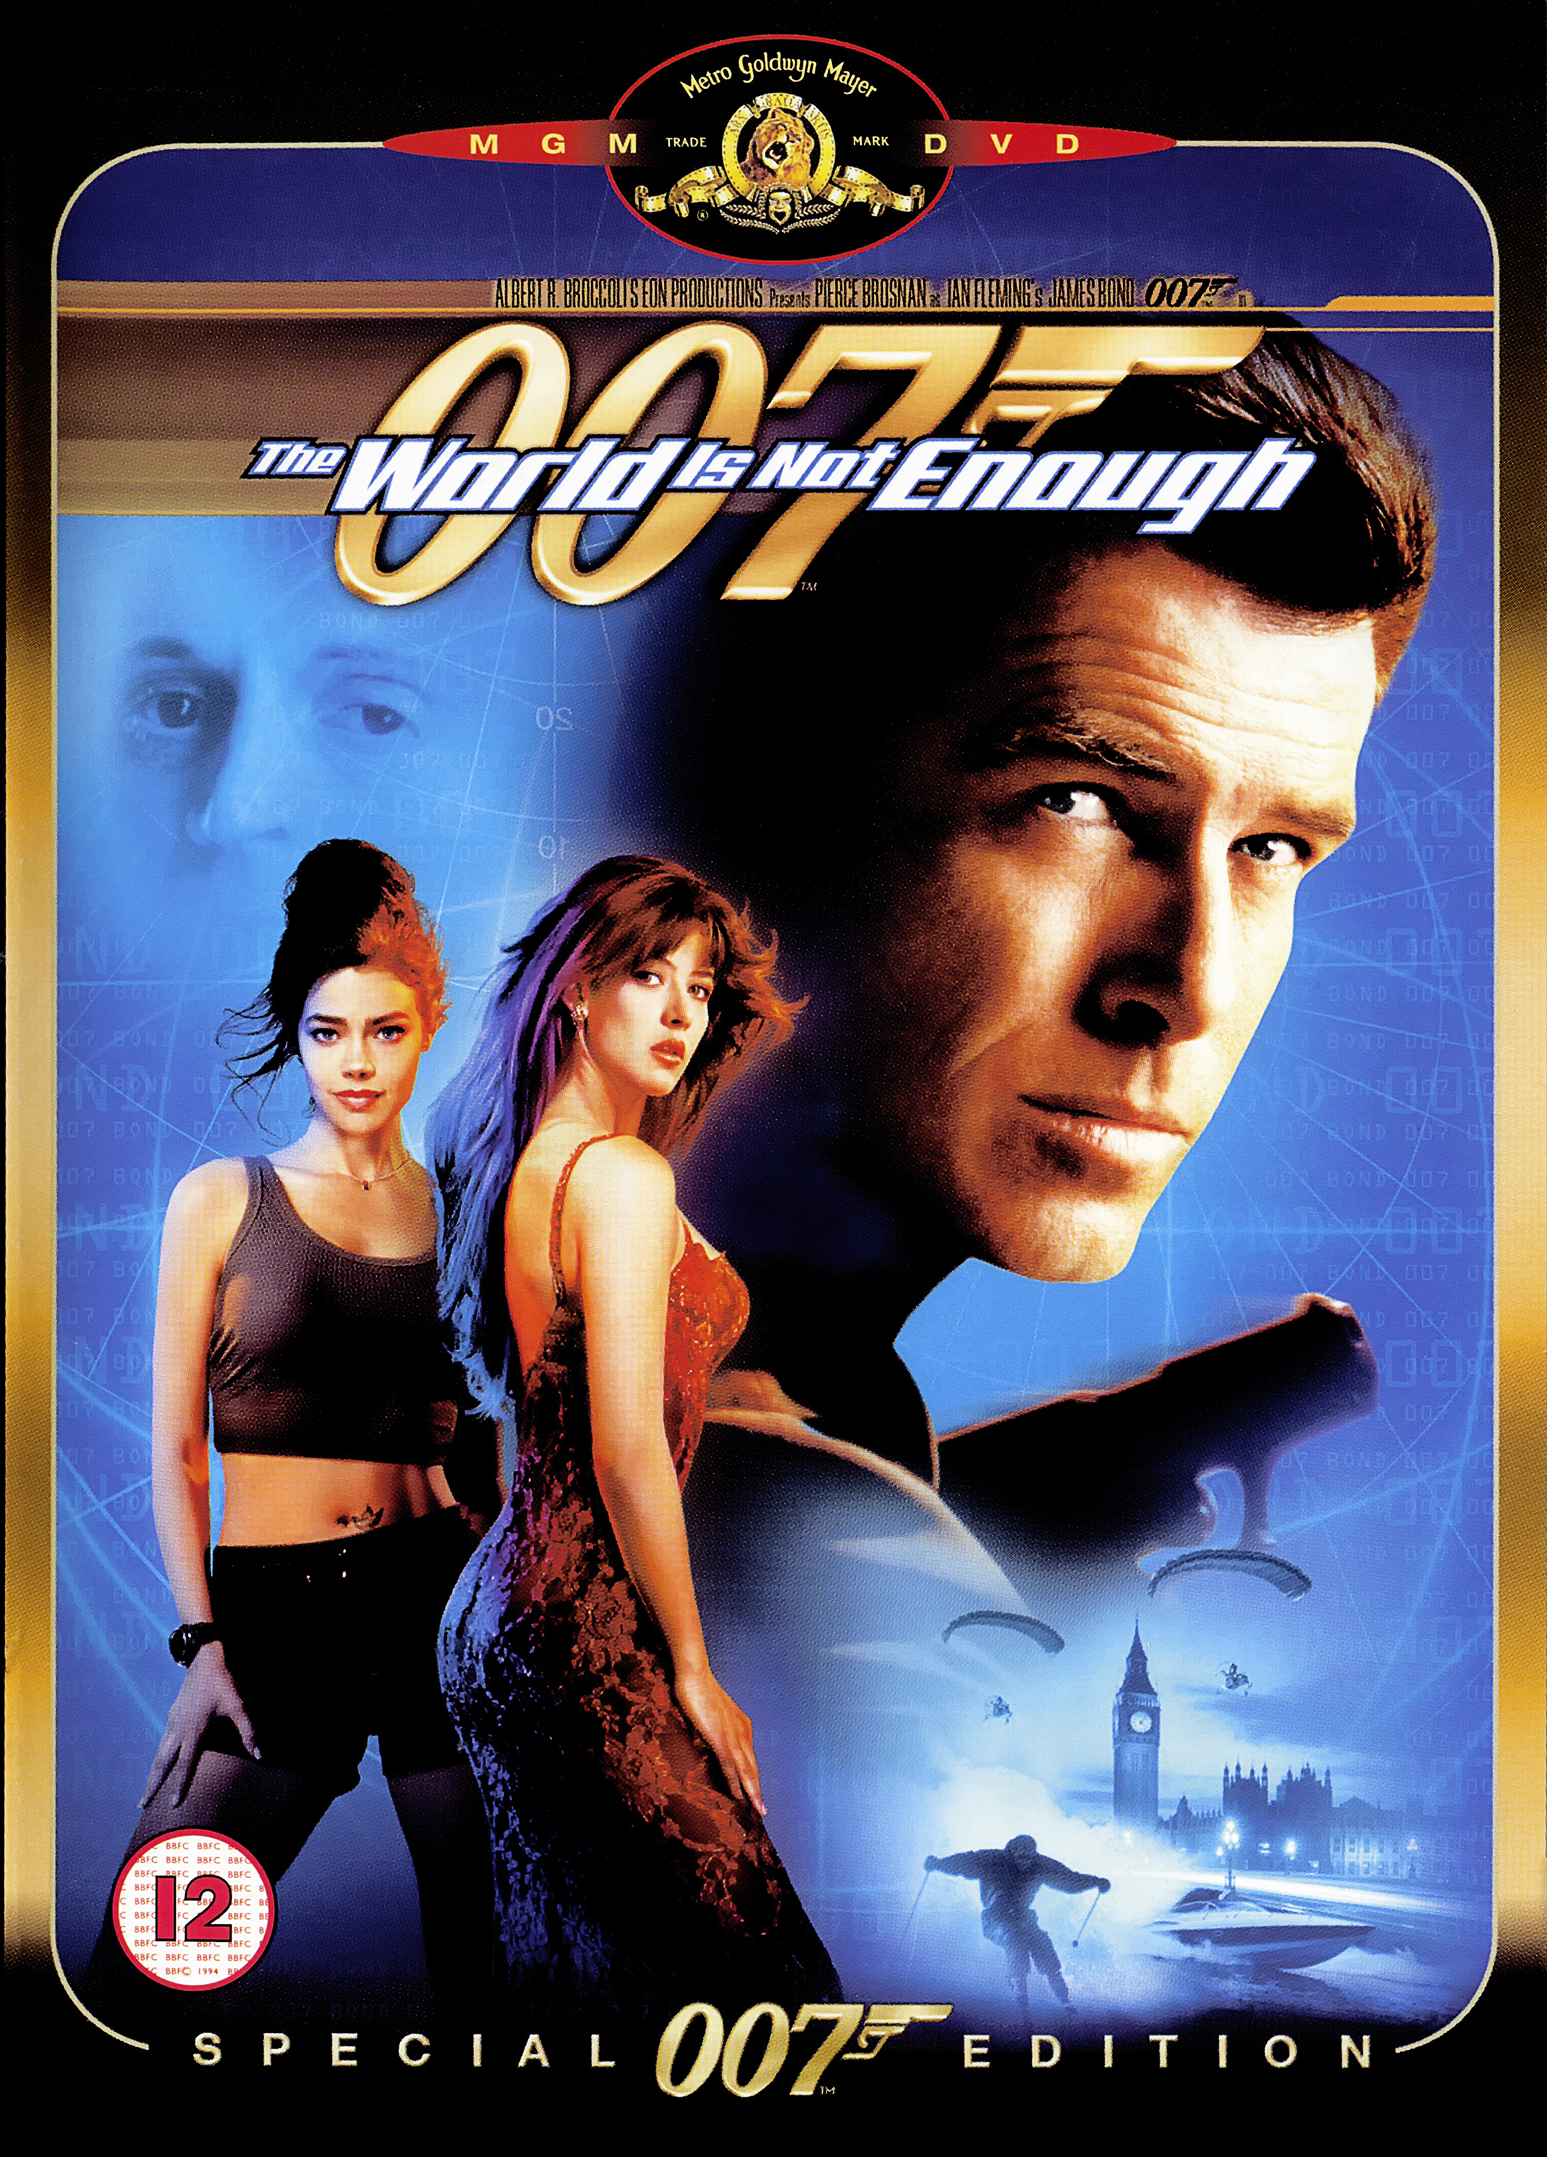 [James Bond] The World Is Not Enough (1999)